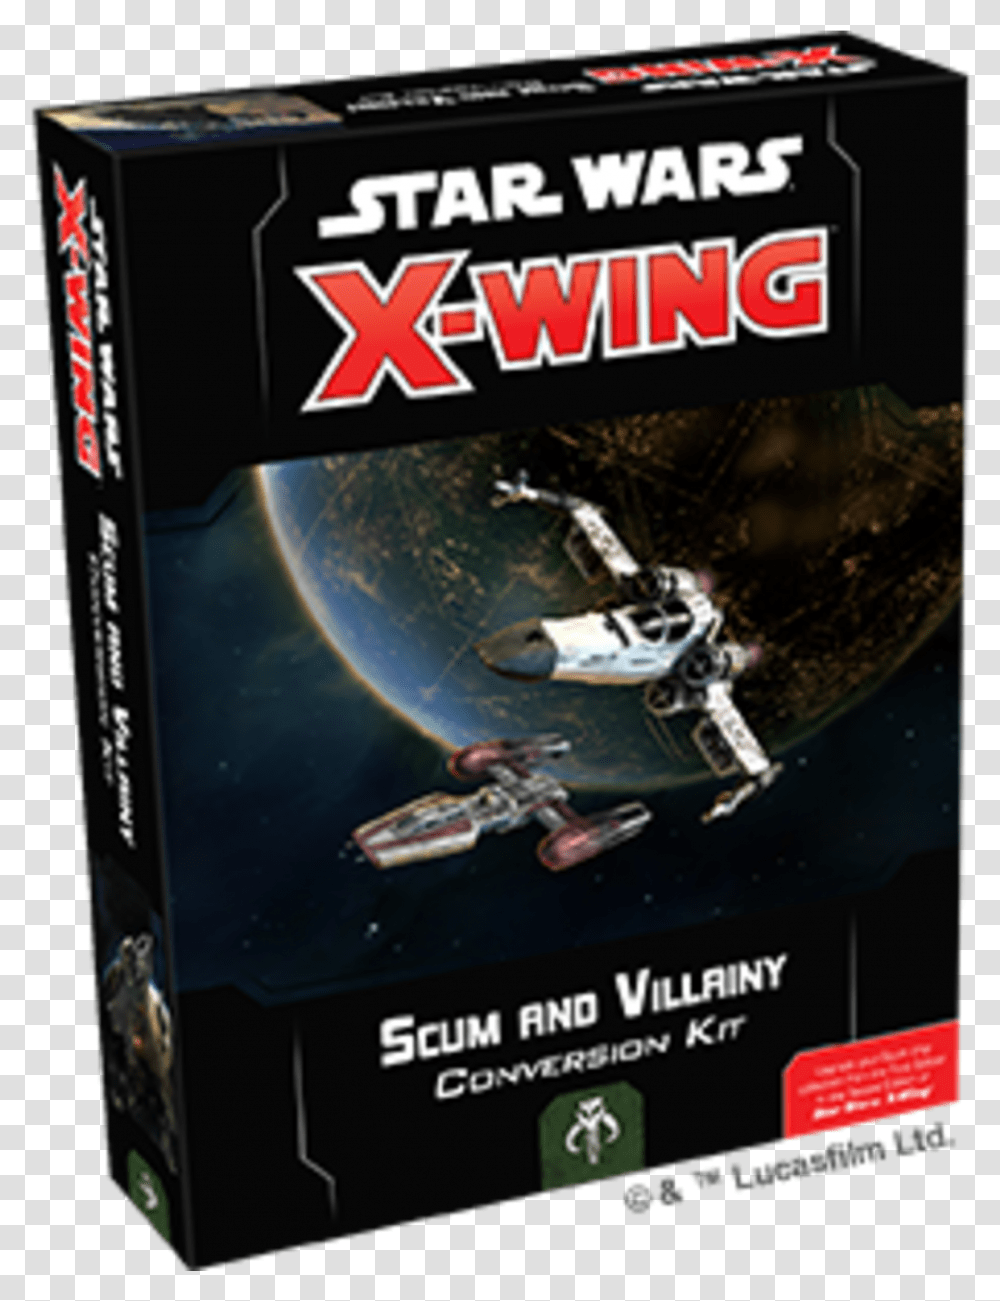 Star Wars X Star Wars X Wing Scum And Villainy Conversion Kit, Vehicle, Transportation, Dvd, Disk Transparent Png